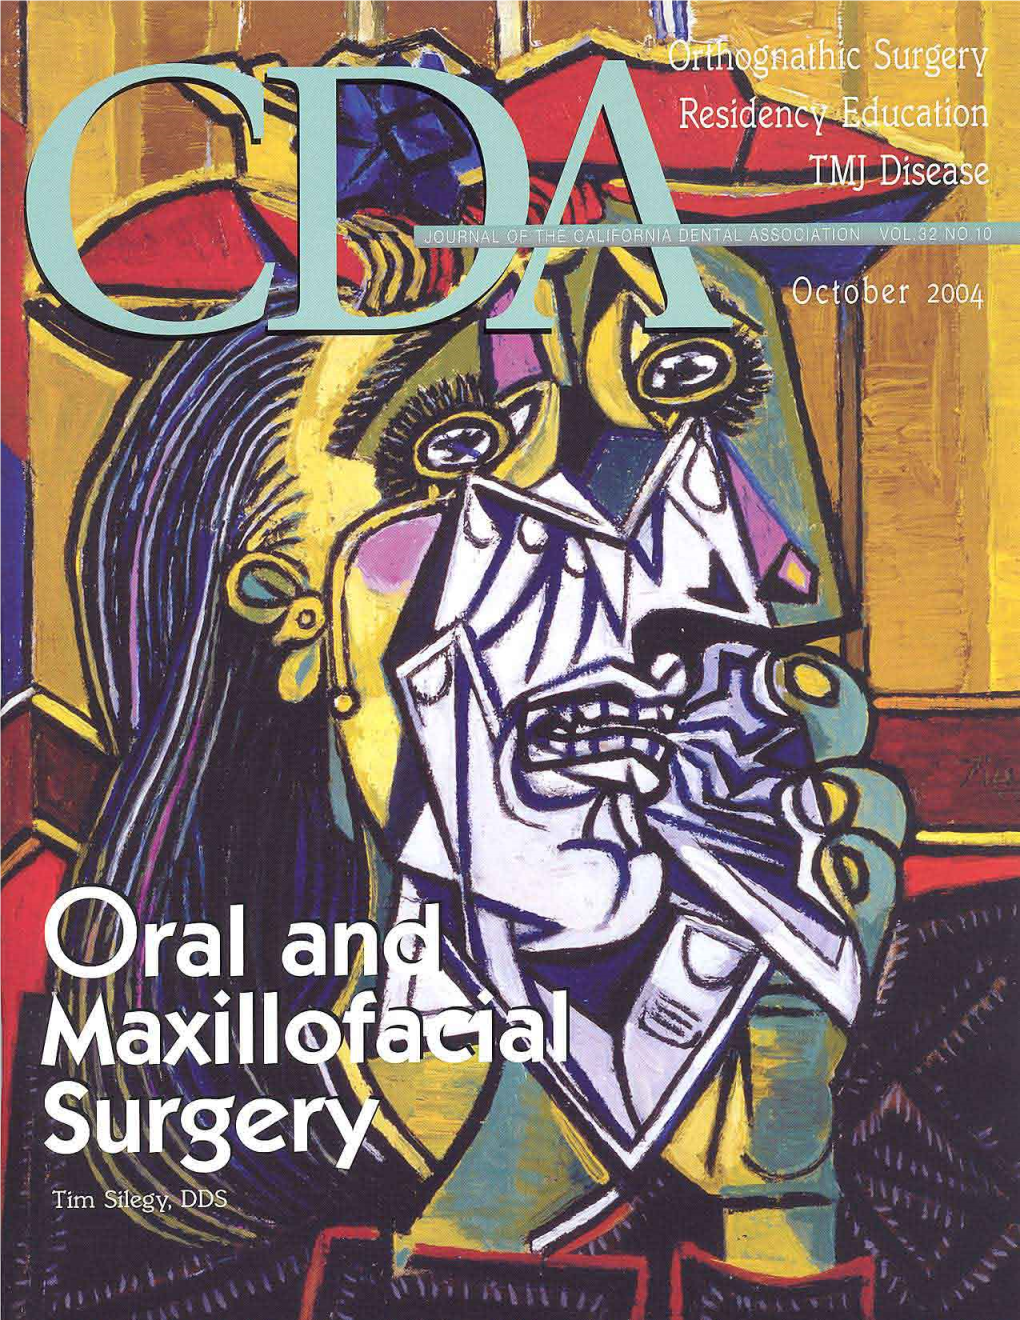 Oral and Maxillofacial Surgery: Saving Faces — Changing Lives an Introduction to the Issue